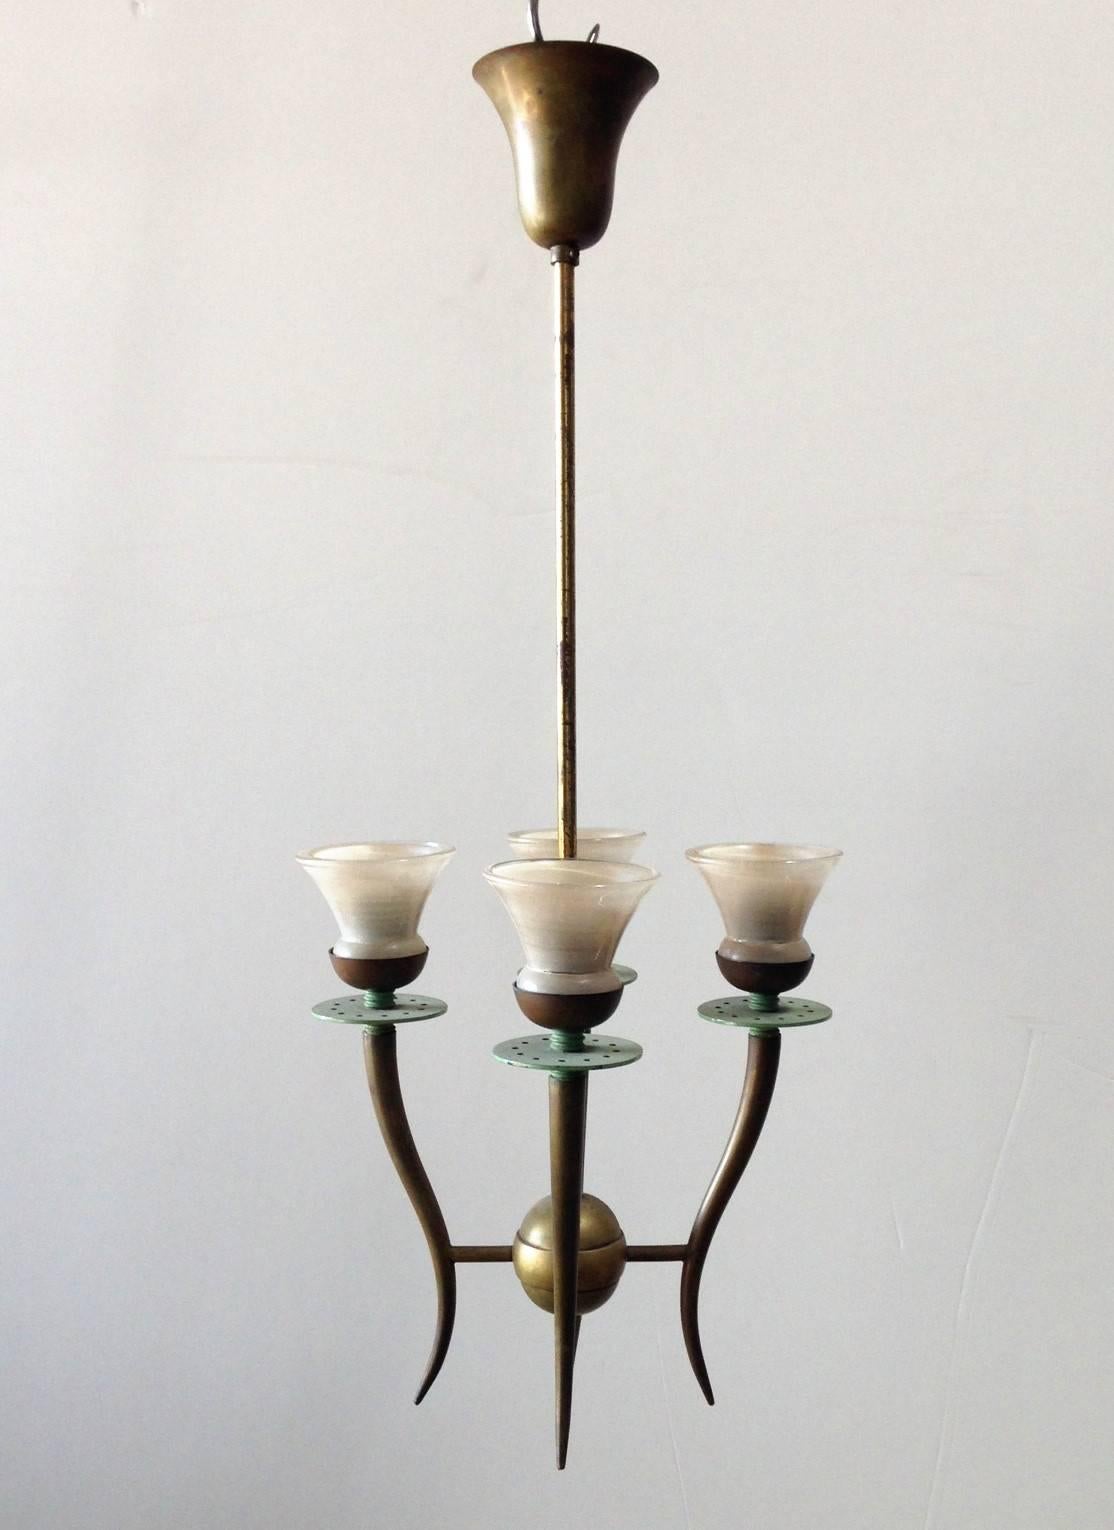 Vintage Italian pendant with four white Murano glasses hand blown in the shape of tulips, mounted on brass frame / In the style of Stilnovo / Made in Italy circa 1950’s
4 lights / E12 or E14 type / max 40W each
Height: 25 inches including rod and